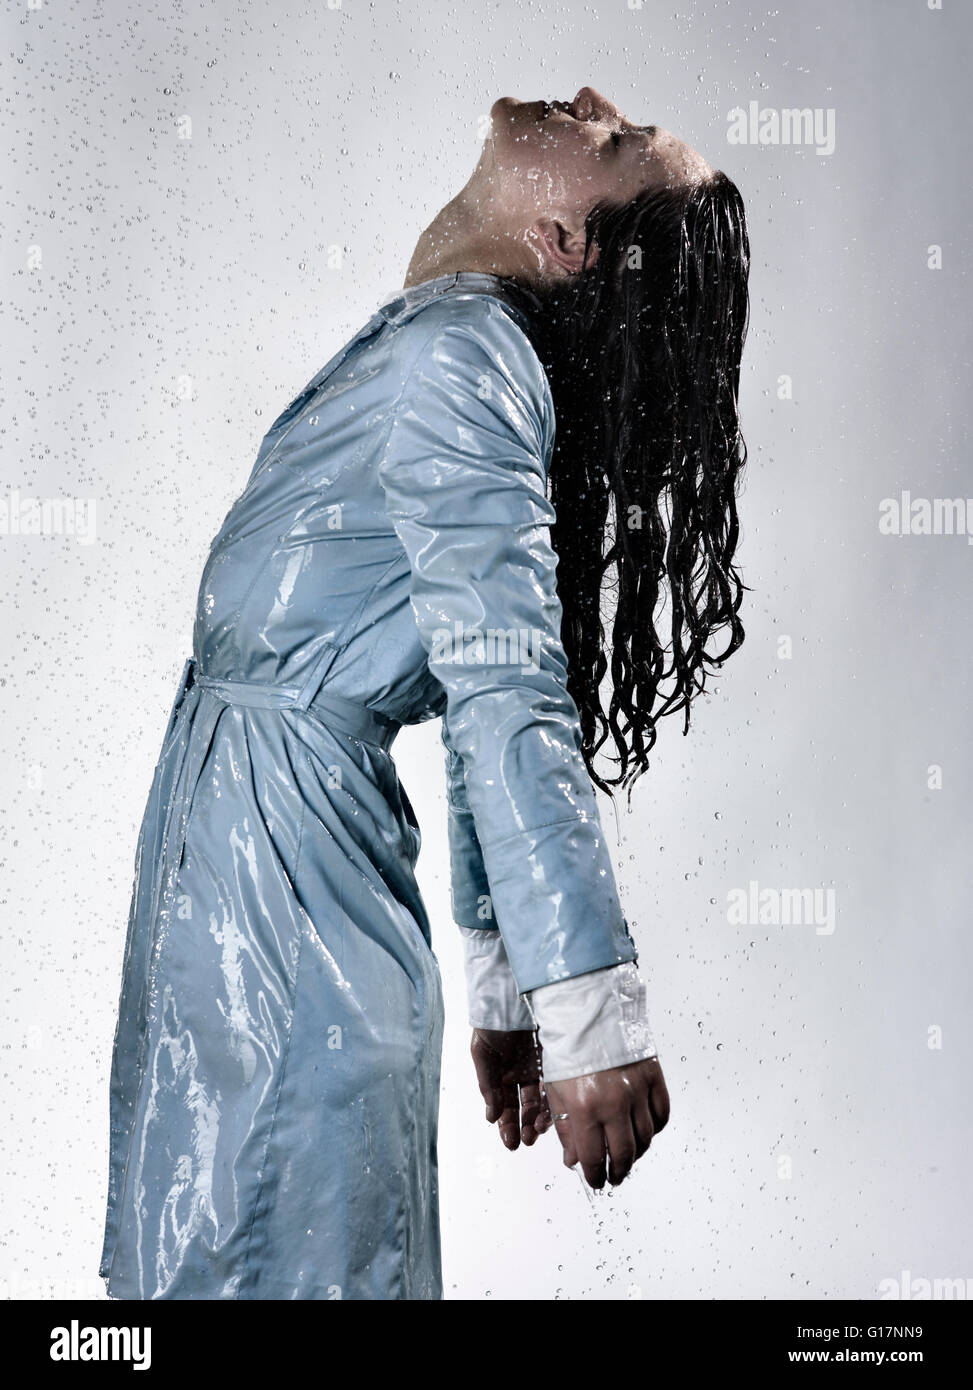 Side view of woman wearing raincoat drenched in water throwing back head Stock Photo